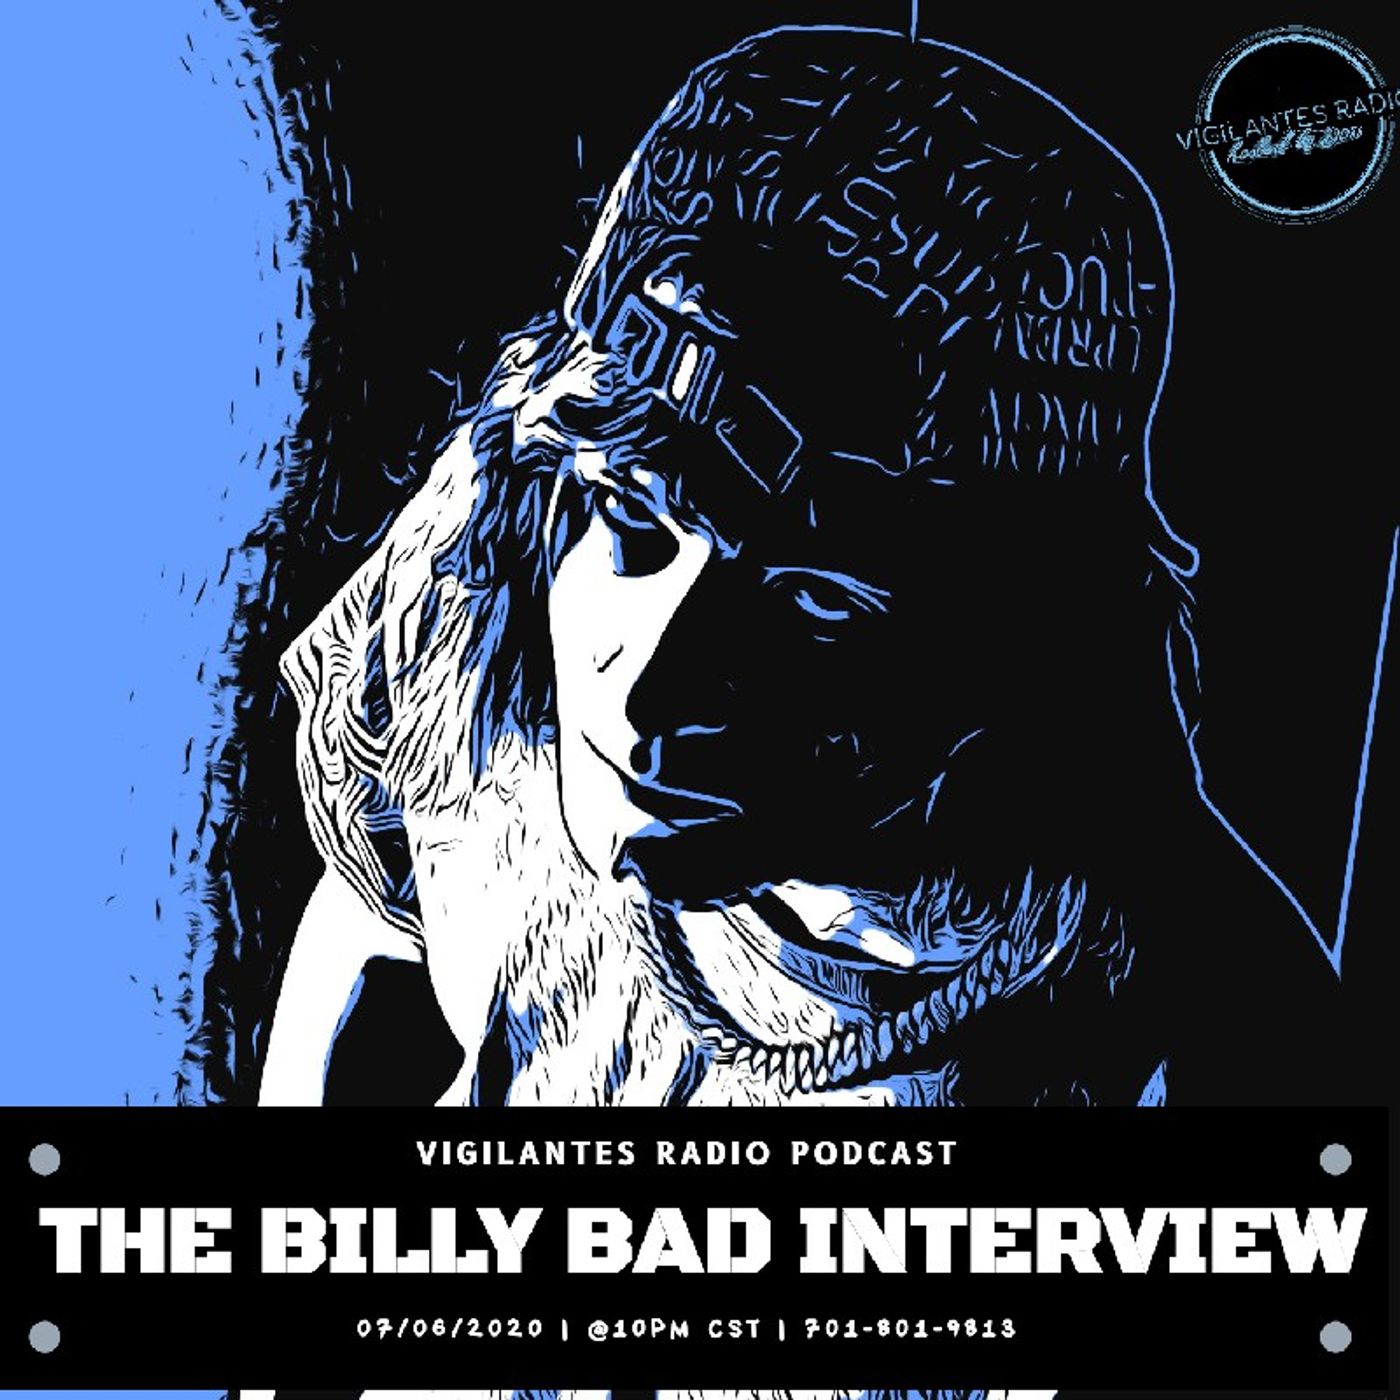 The Billy Bad Interview. Image